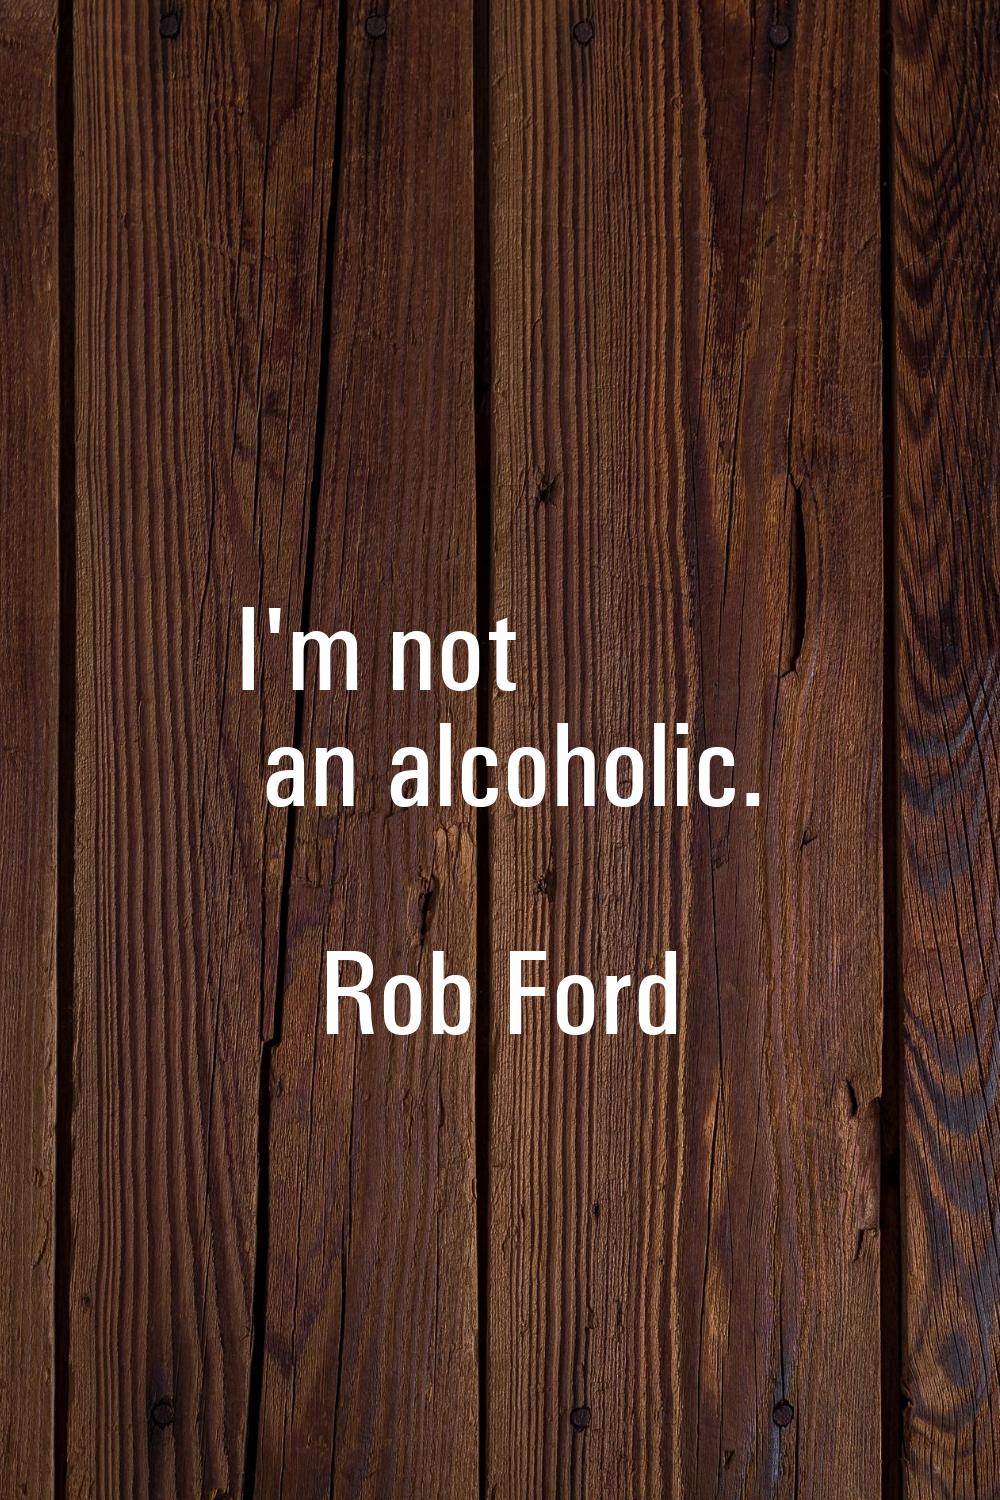 I'm not an alcoholic.